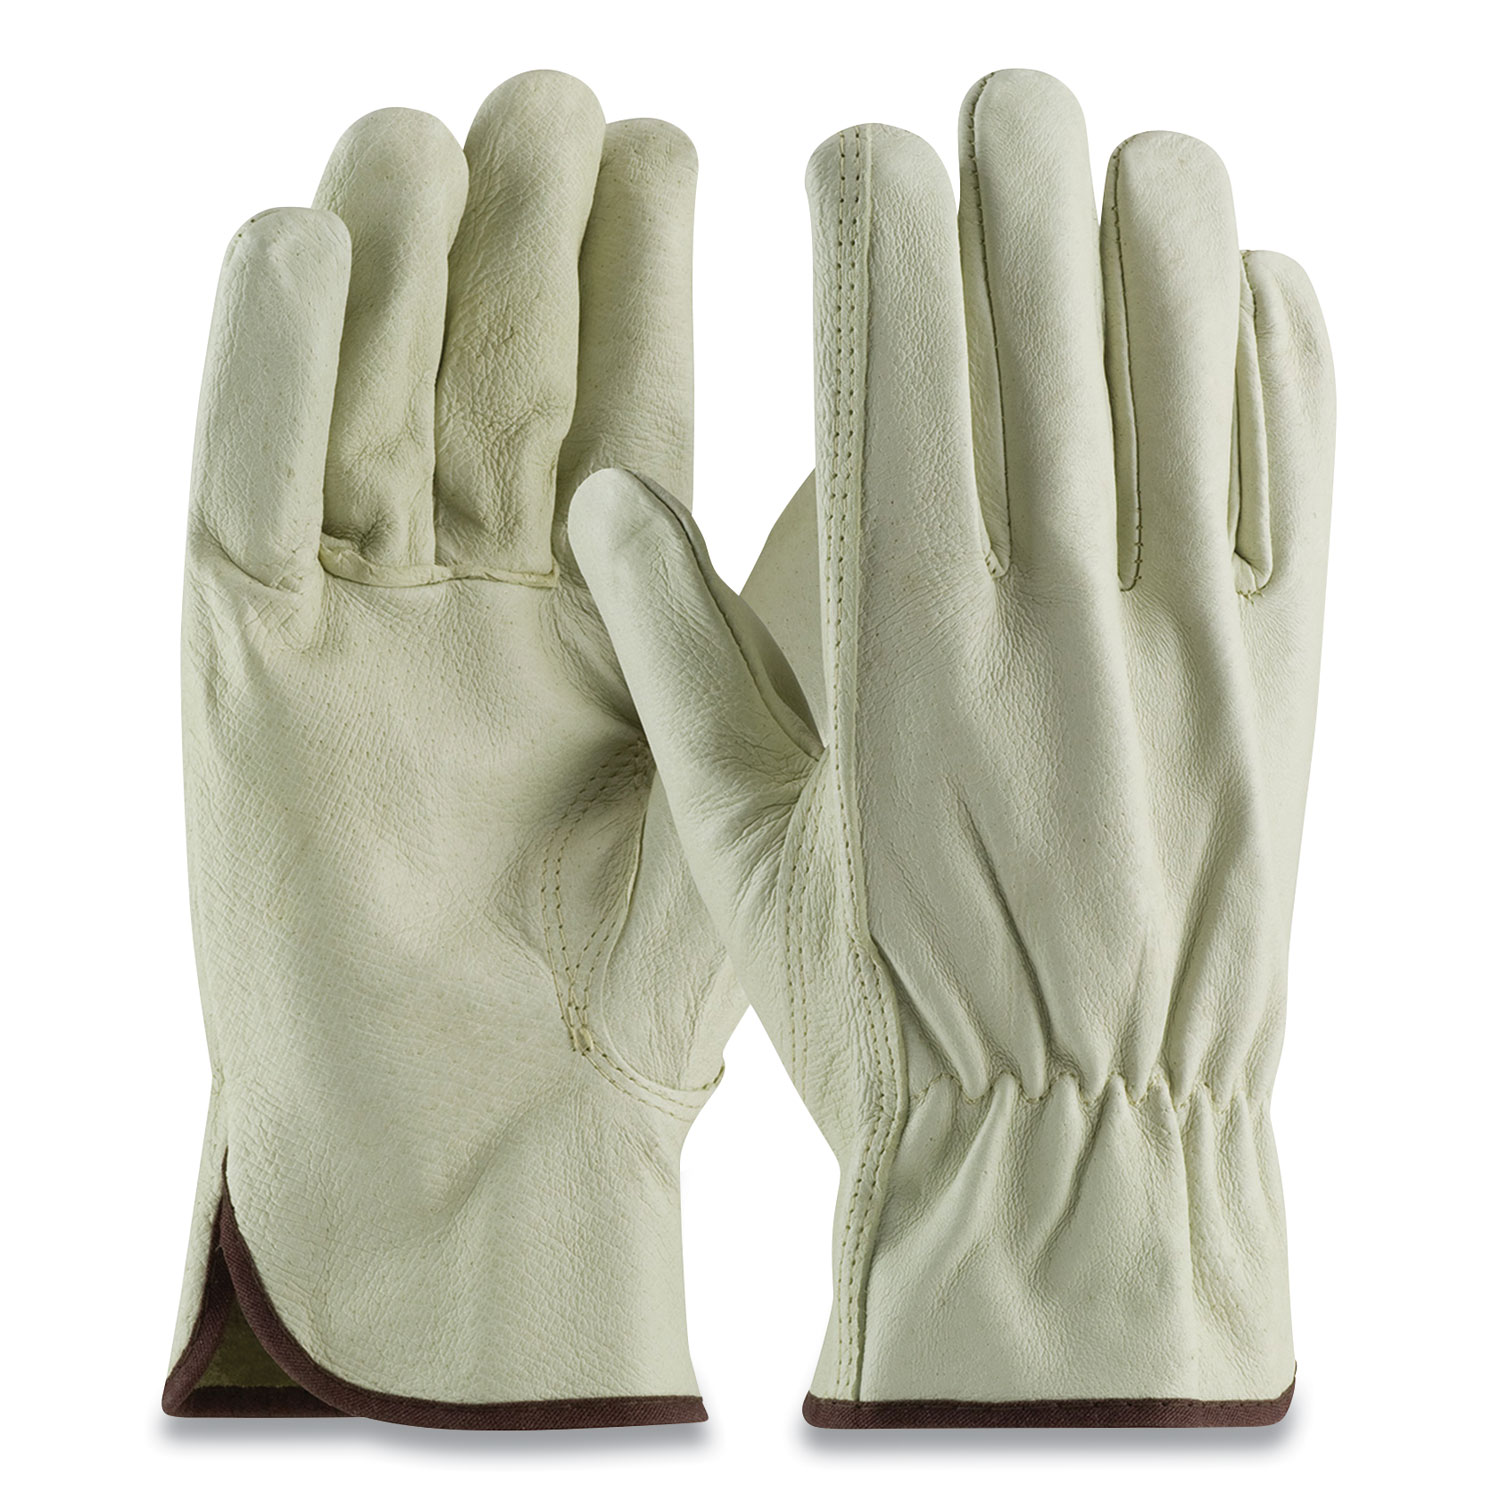 PIP Top-Grain Pigskin Leather Drivers Gloves, Economy Grade, Large, Gray